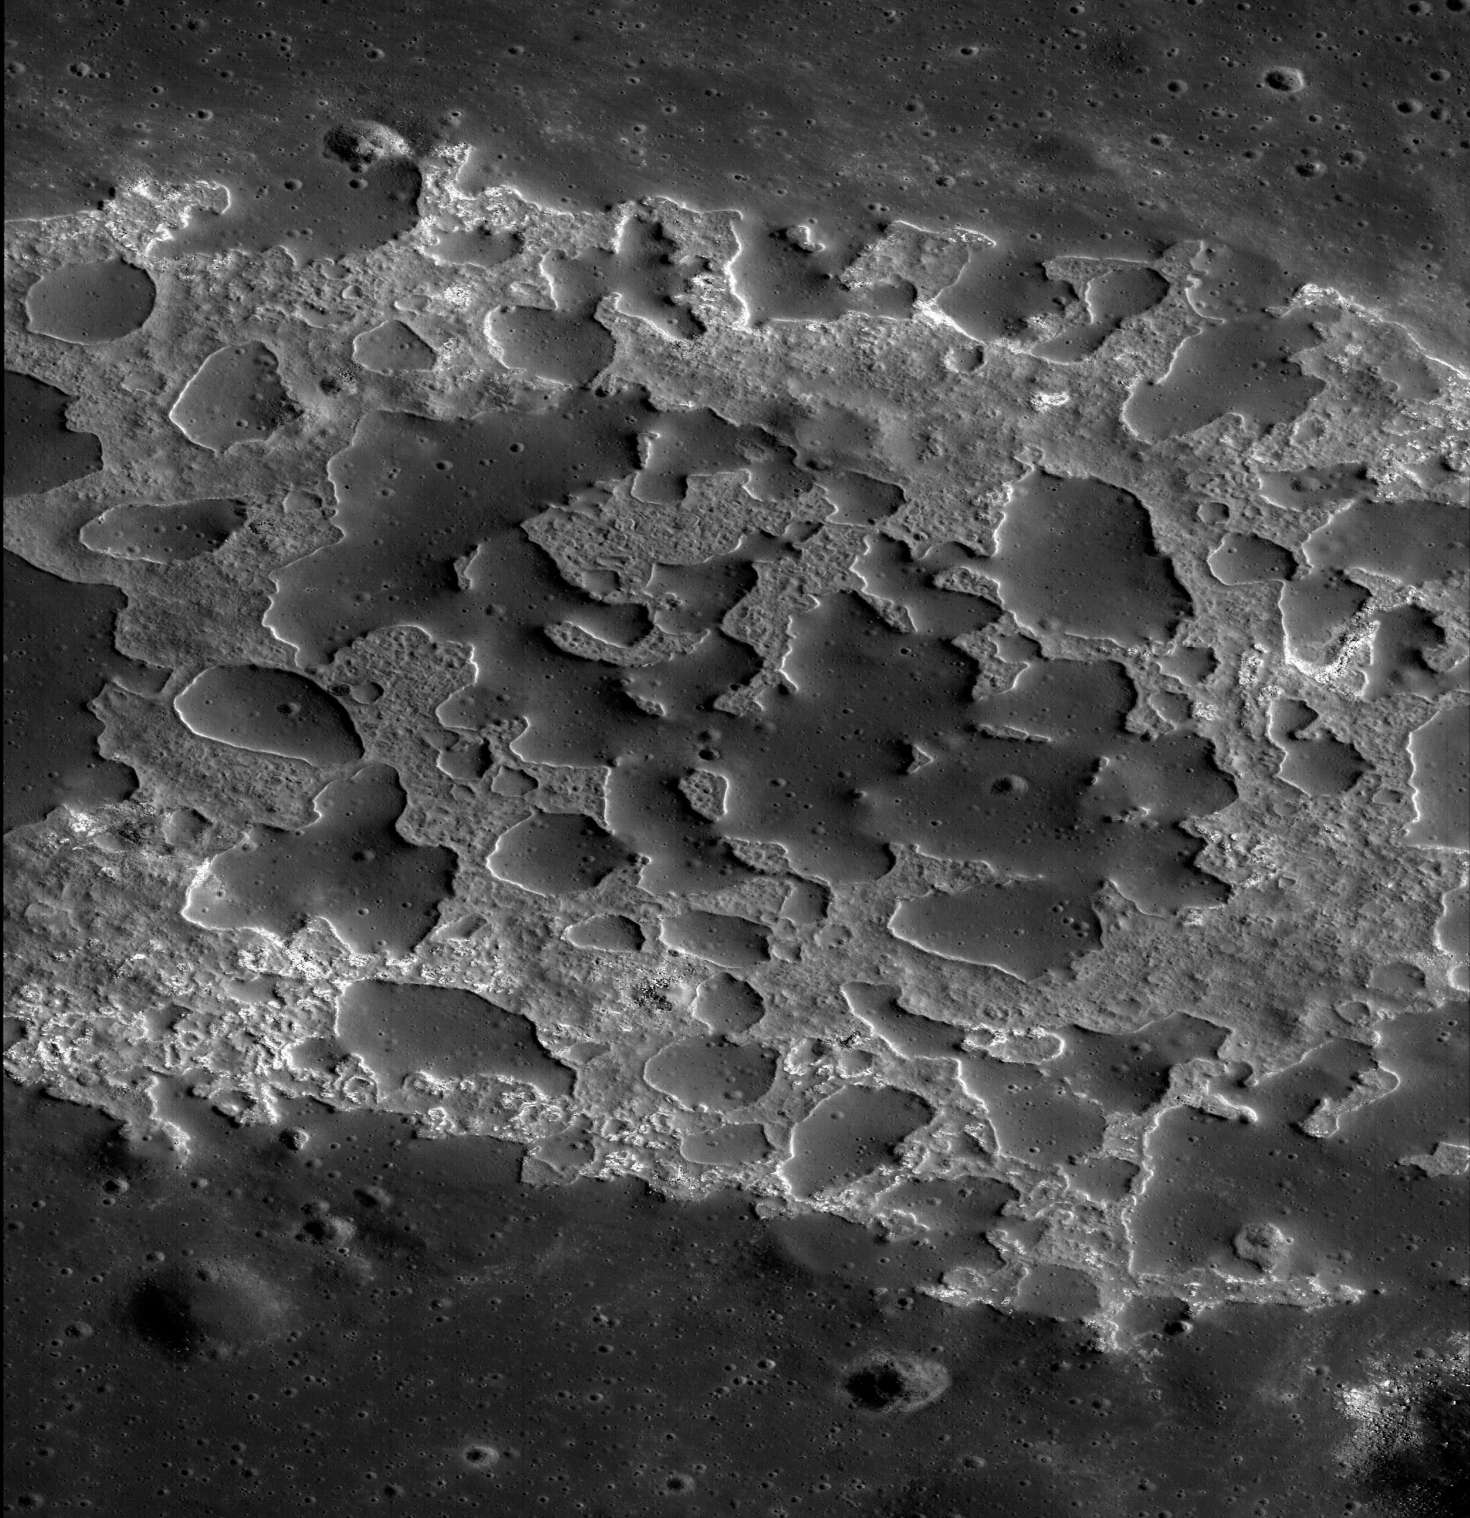 Ina crater on the moon